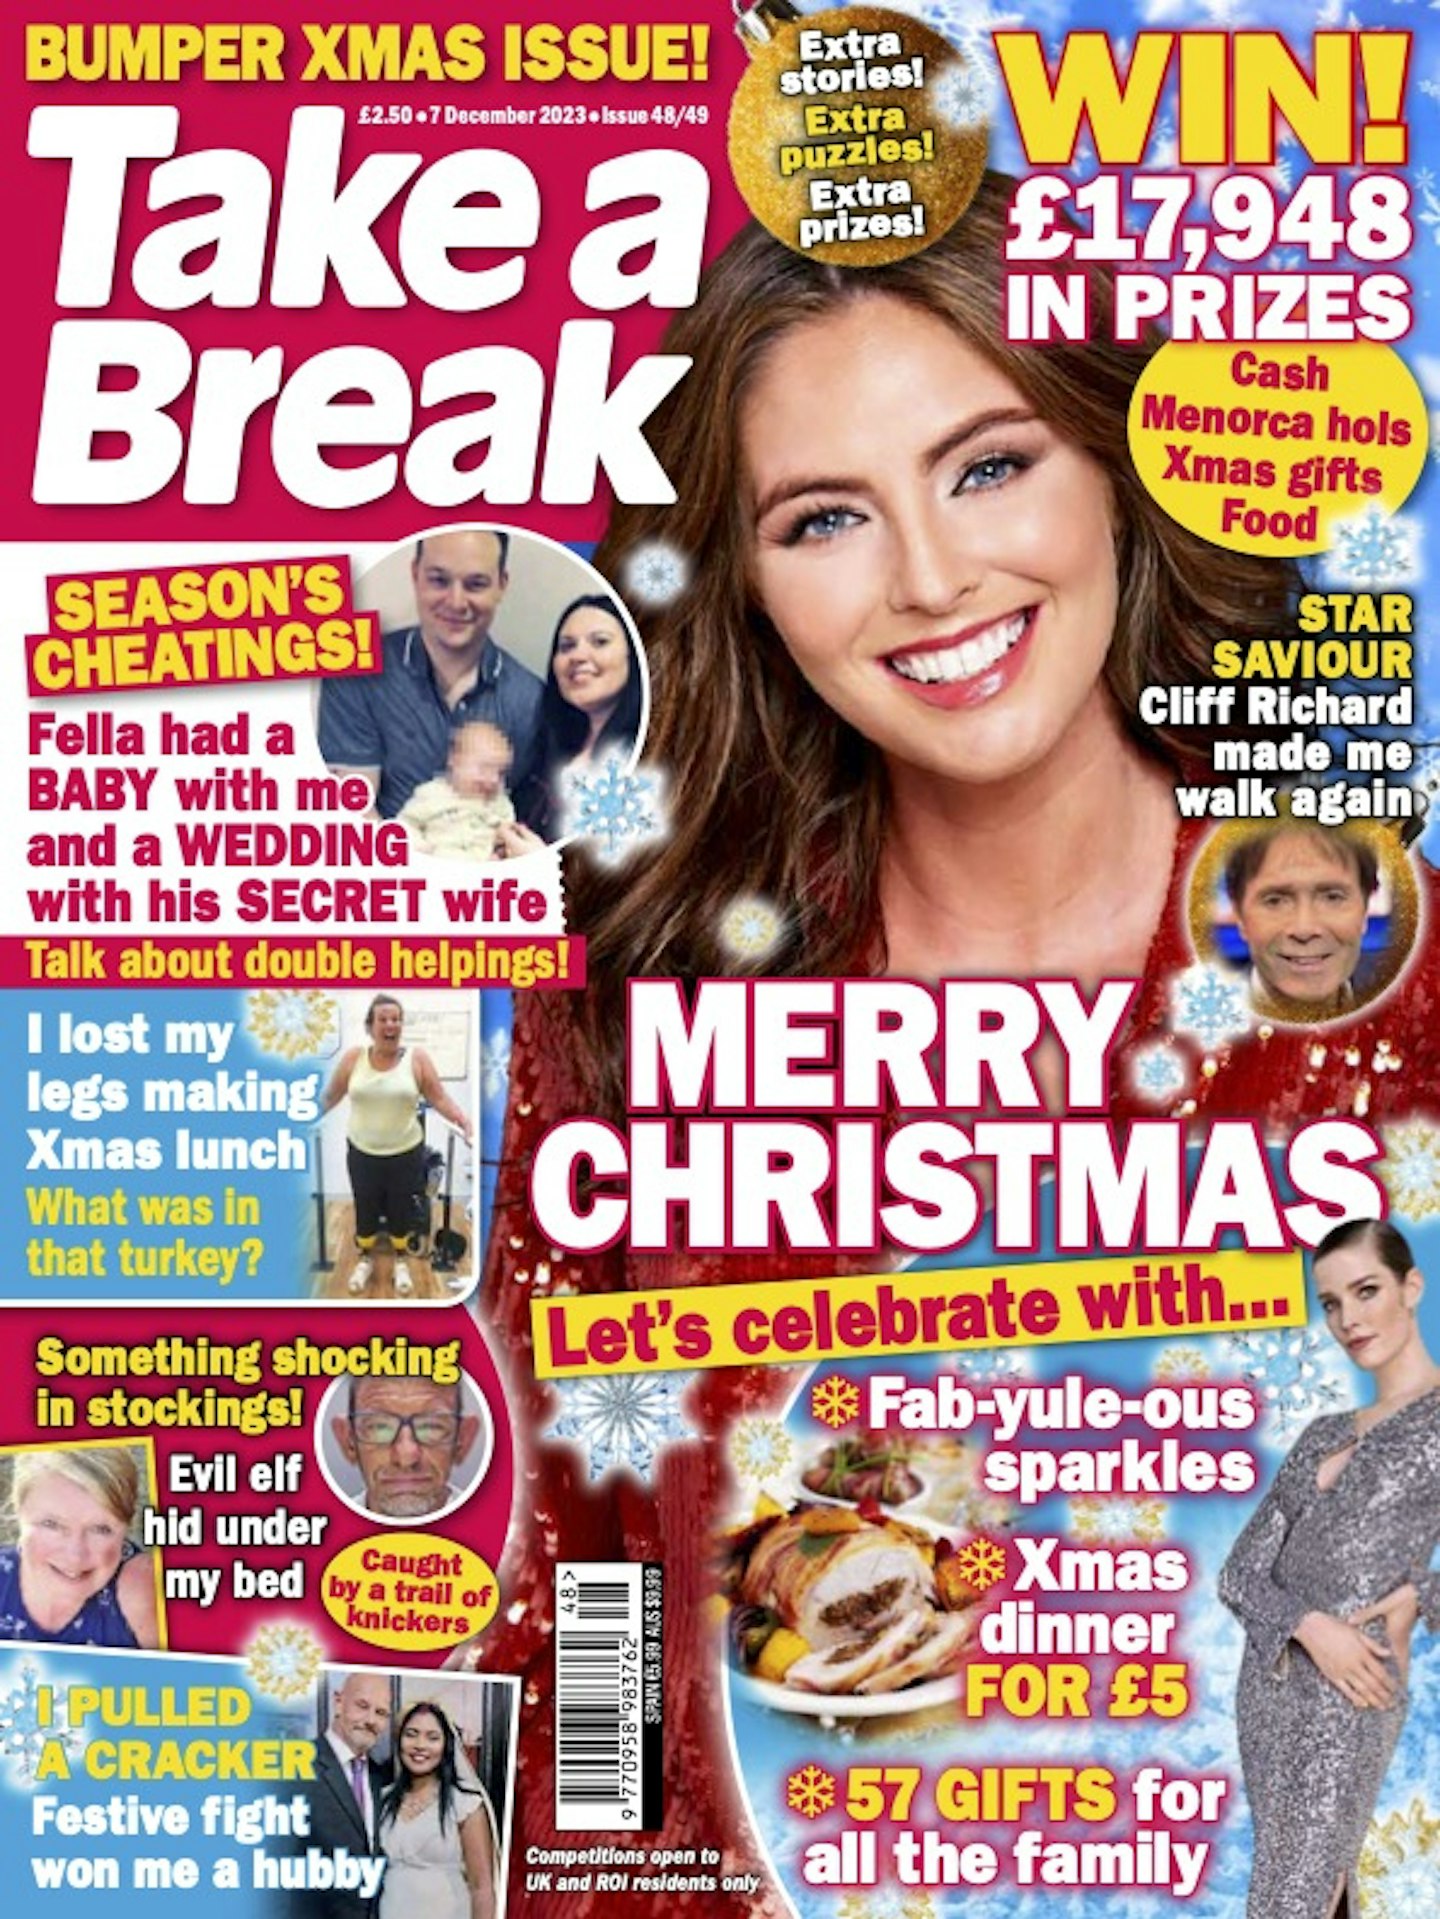 take a break issue 48/49 cover